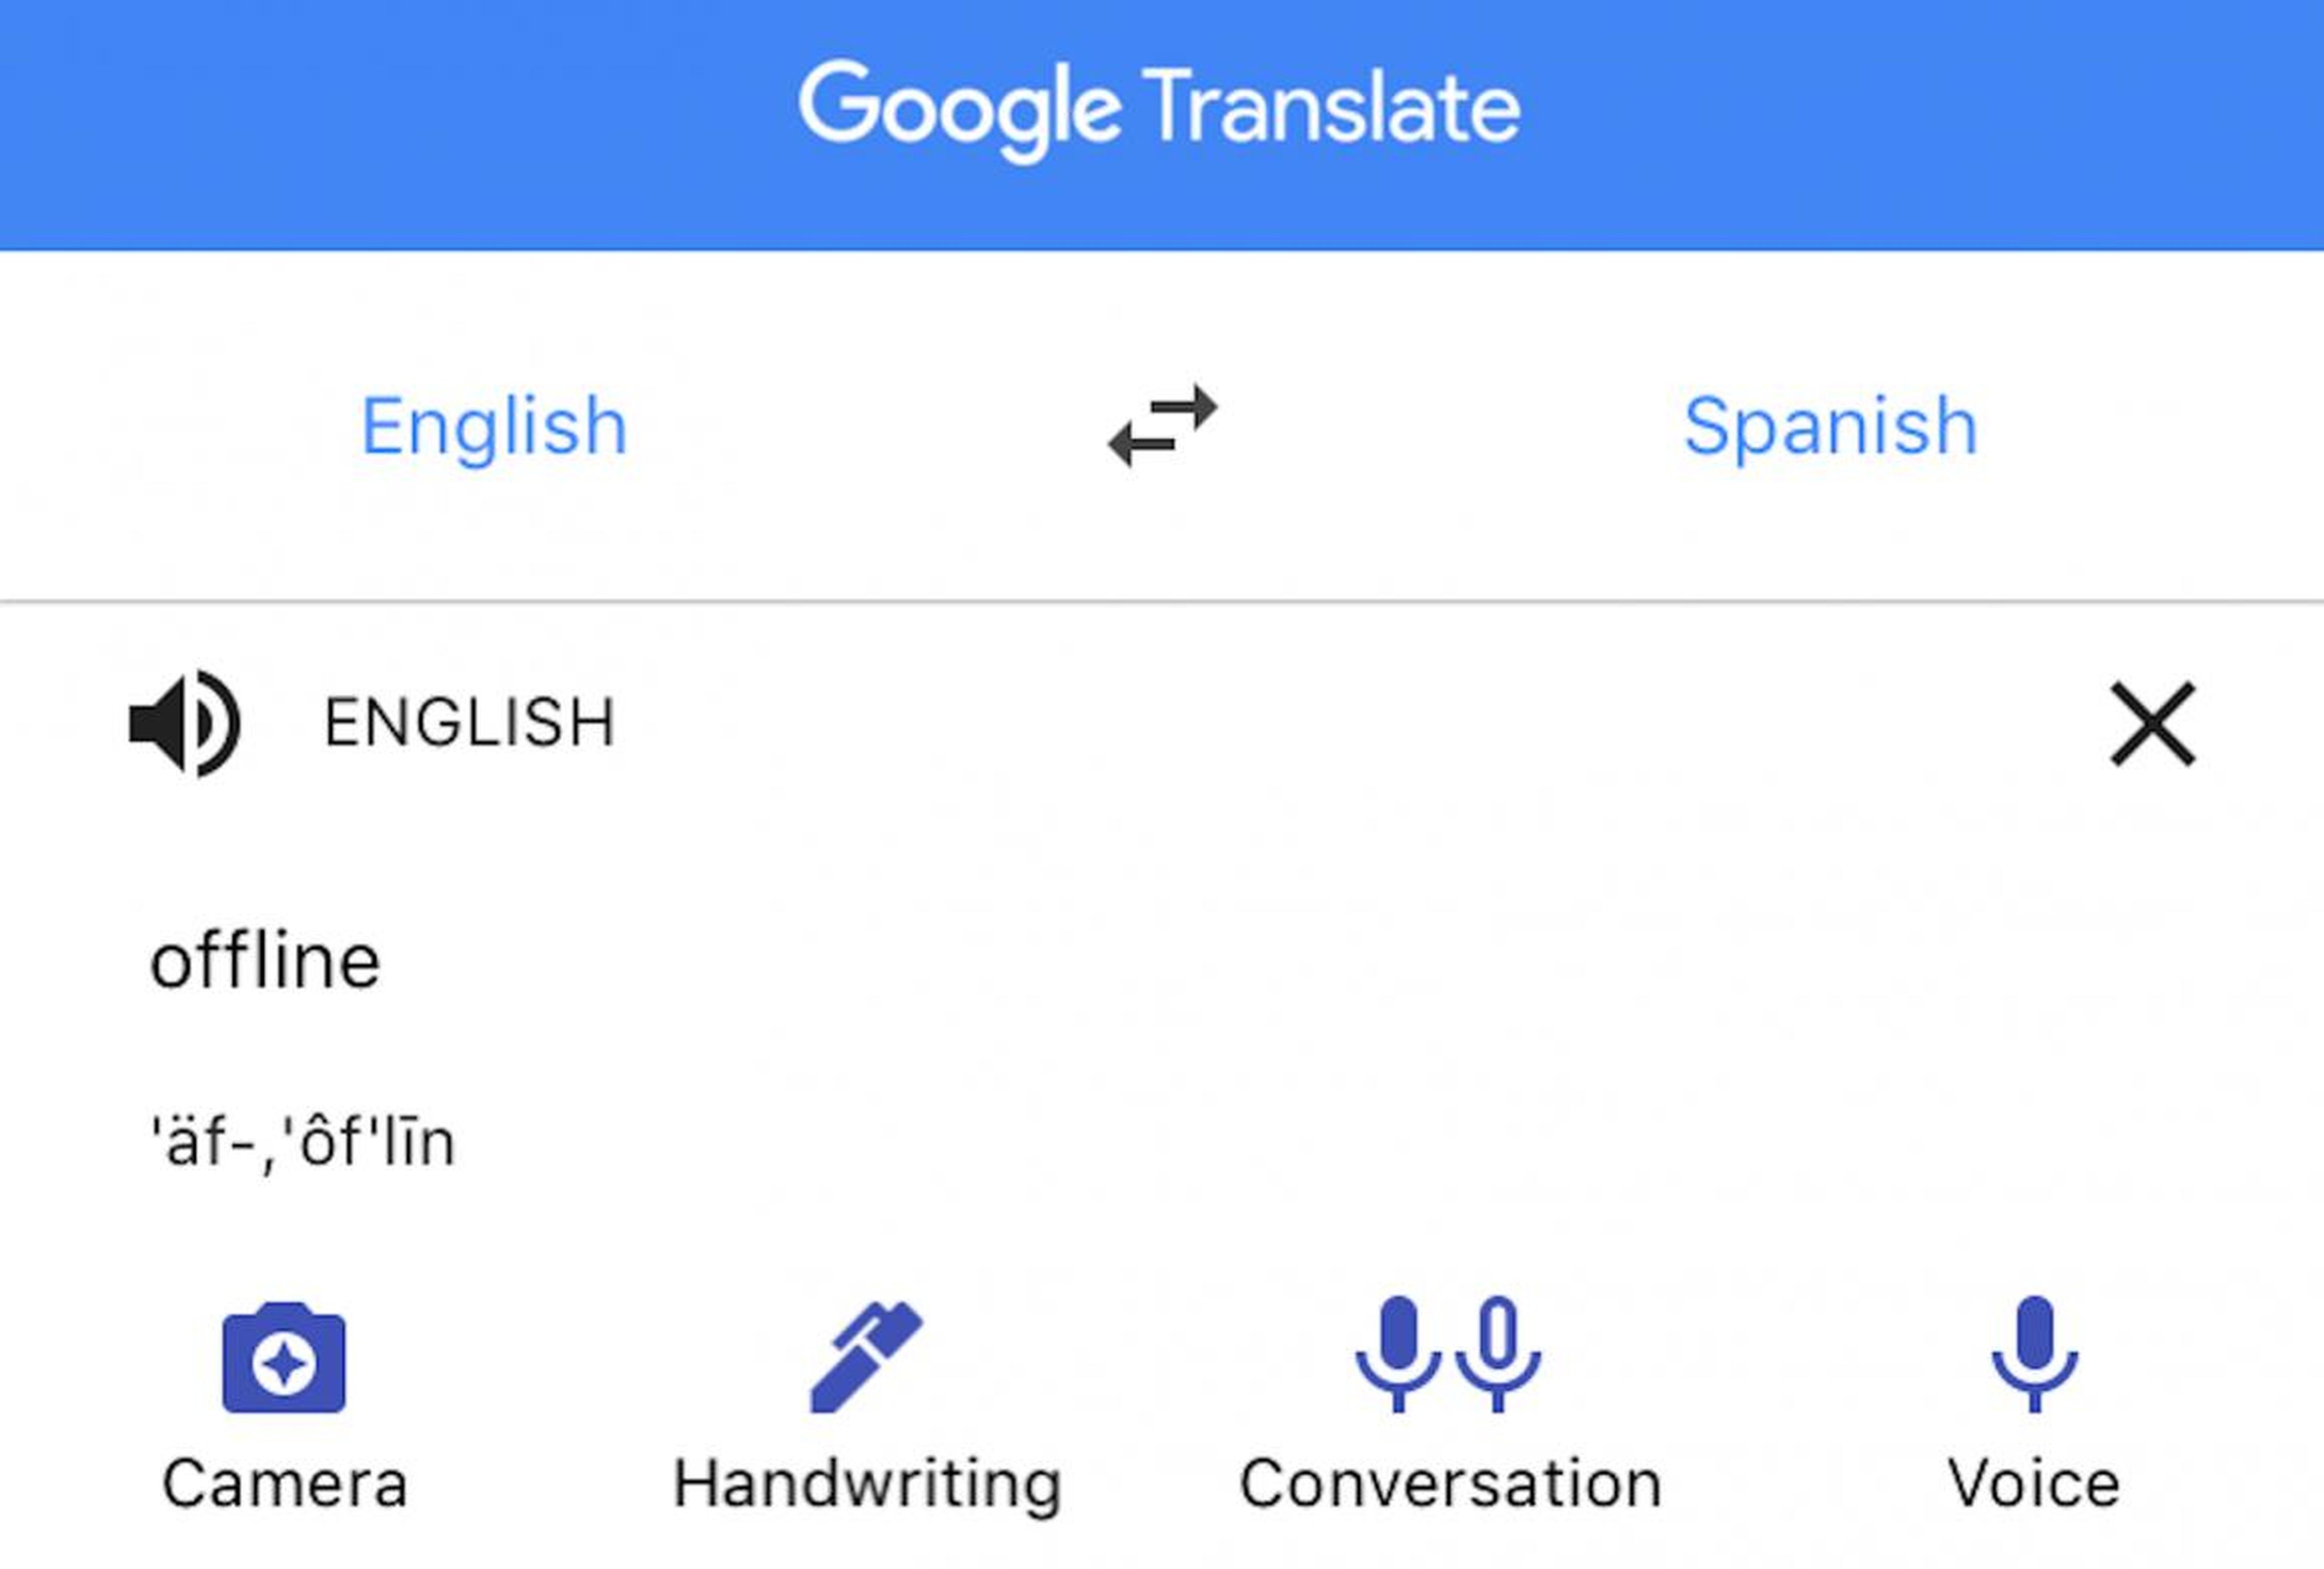 Tap a language on either side of the translate divide to download it.